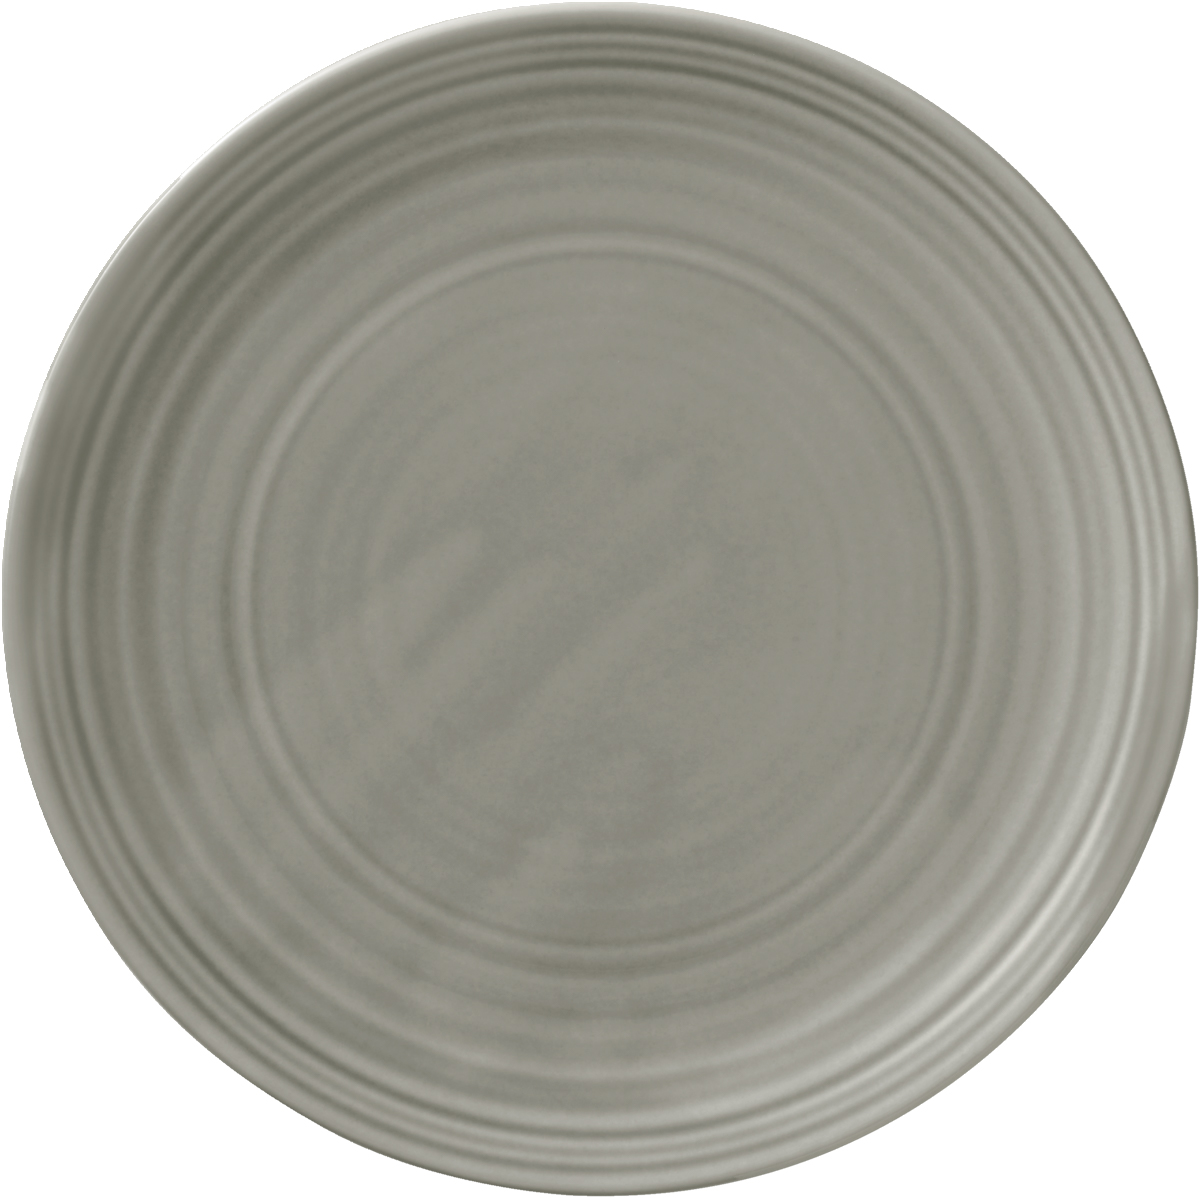 Teller flach rund coup 23cm COUNTRY HOUSE GRAY